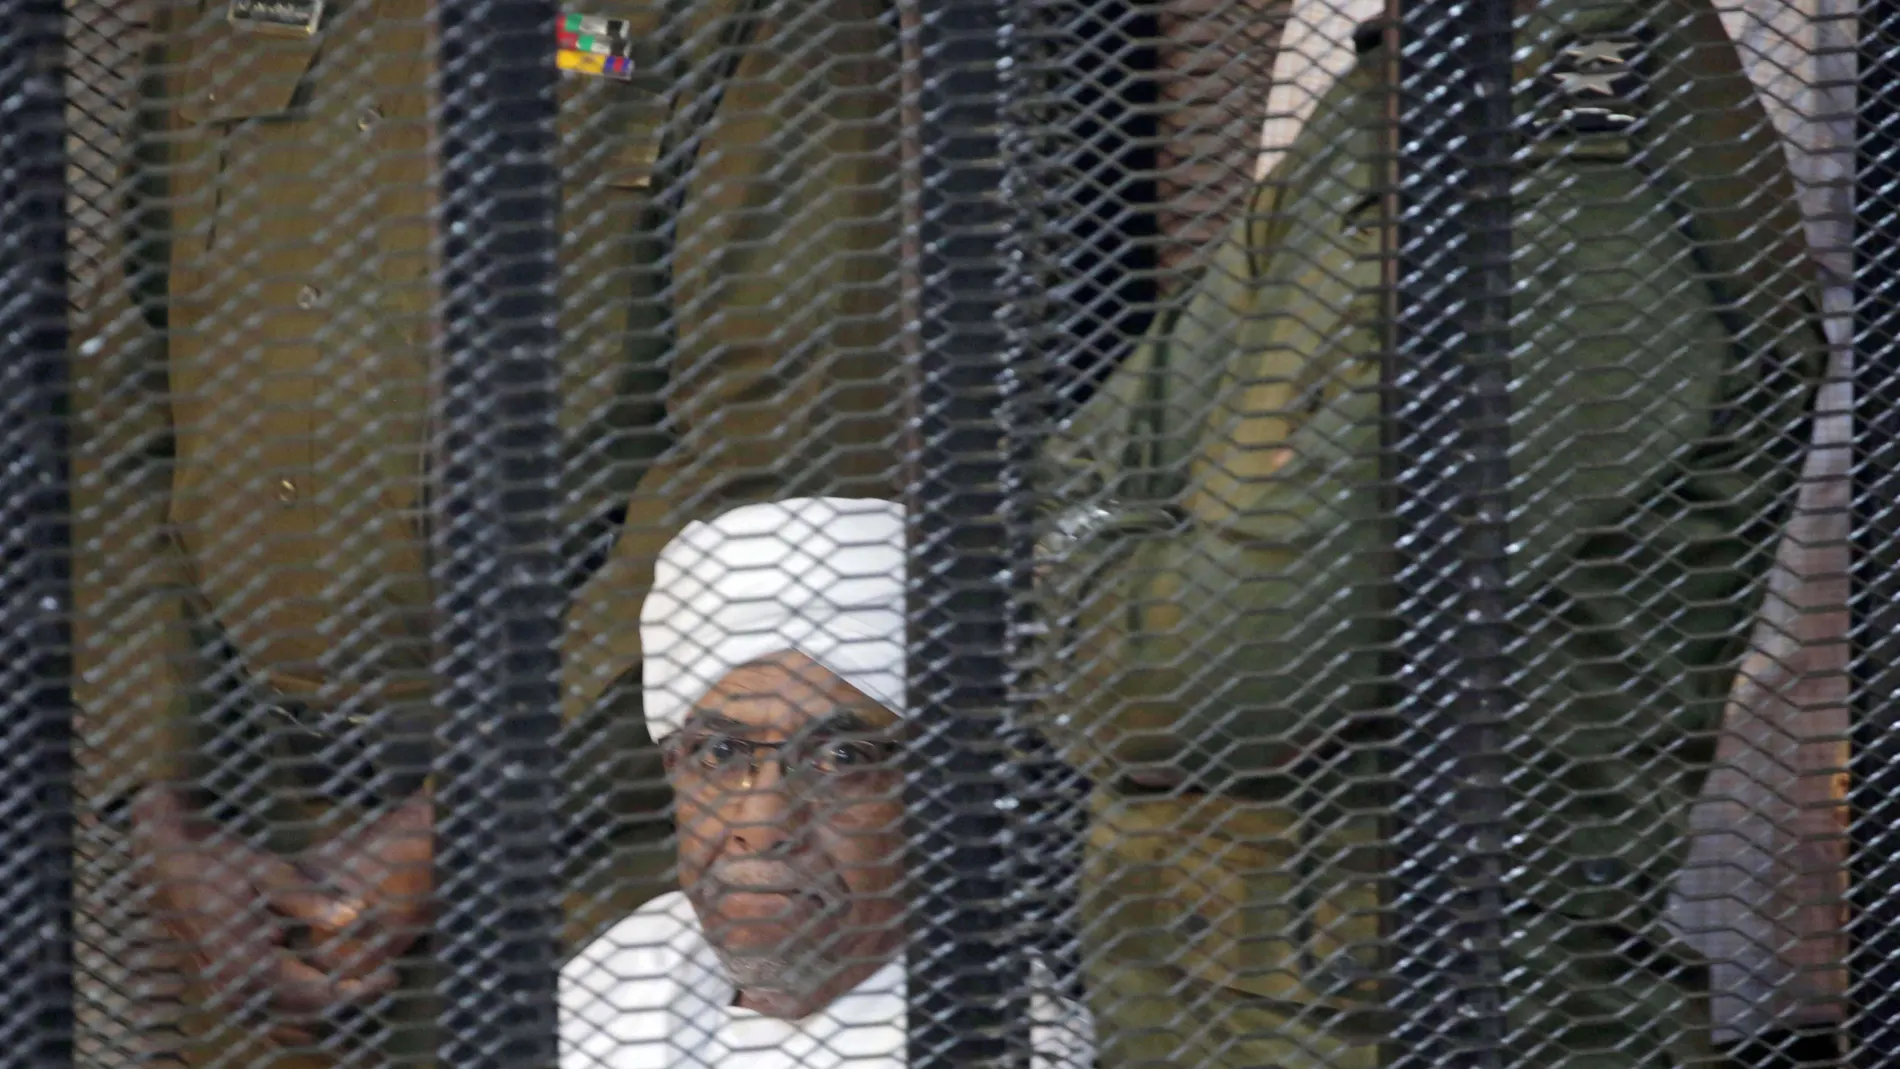 Court finds Sudan's ousted president al-Bashir guilty on corruption charges